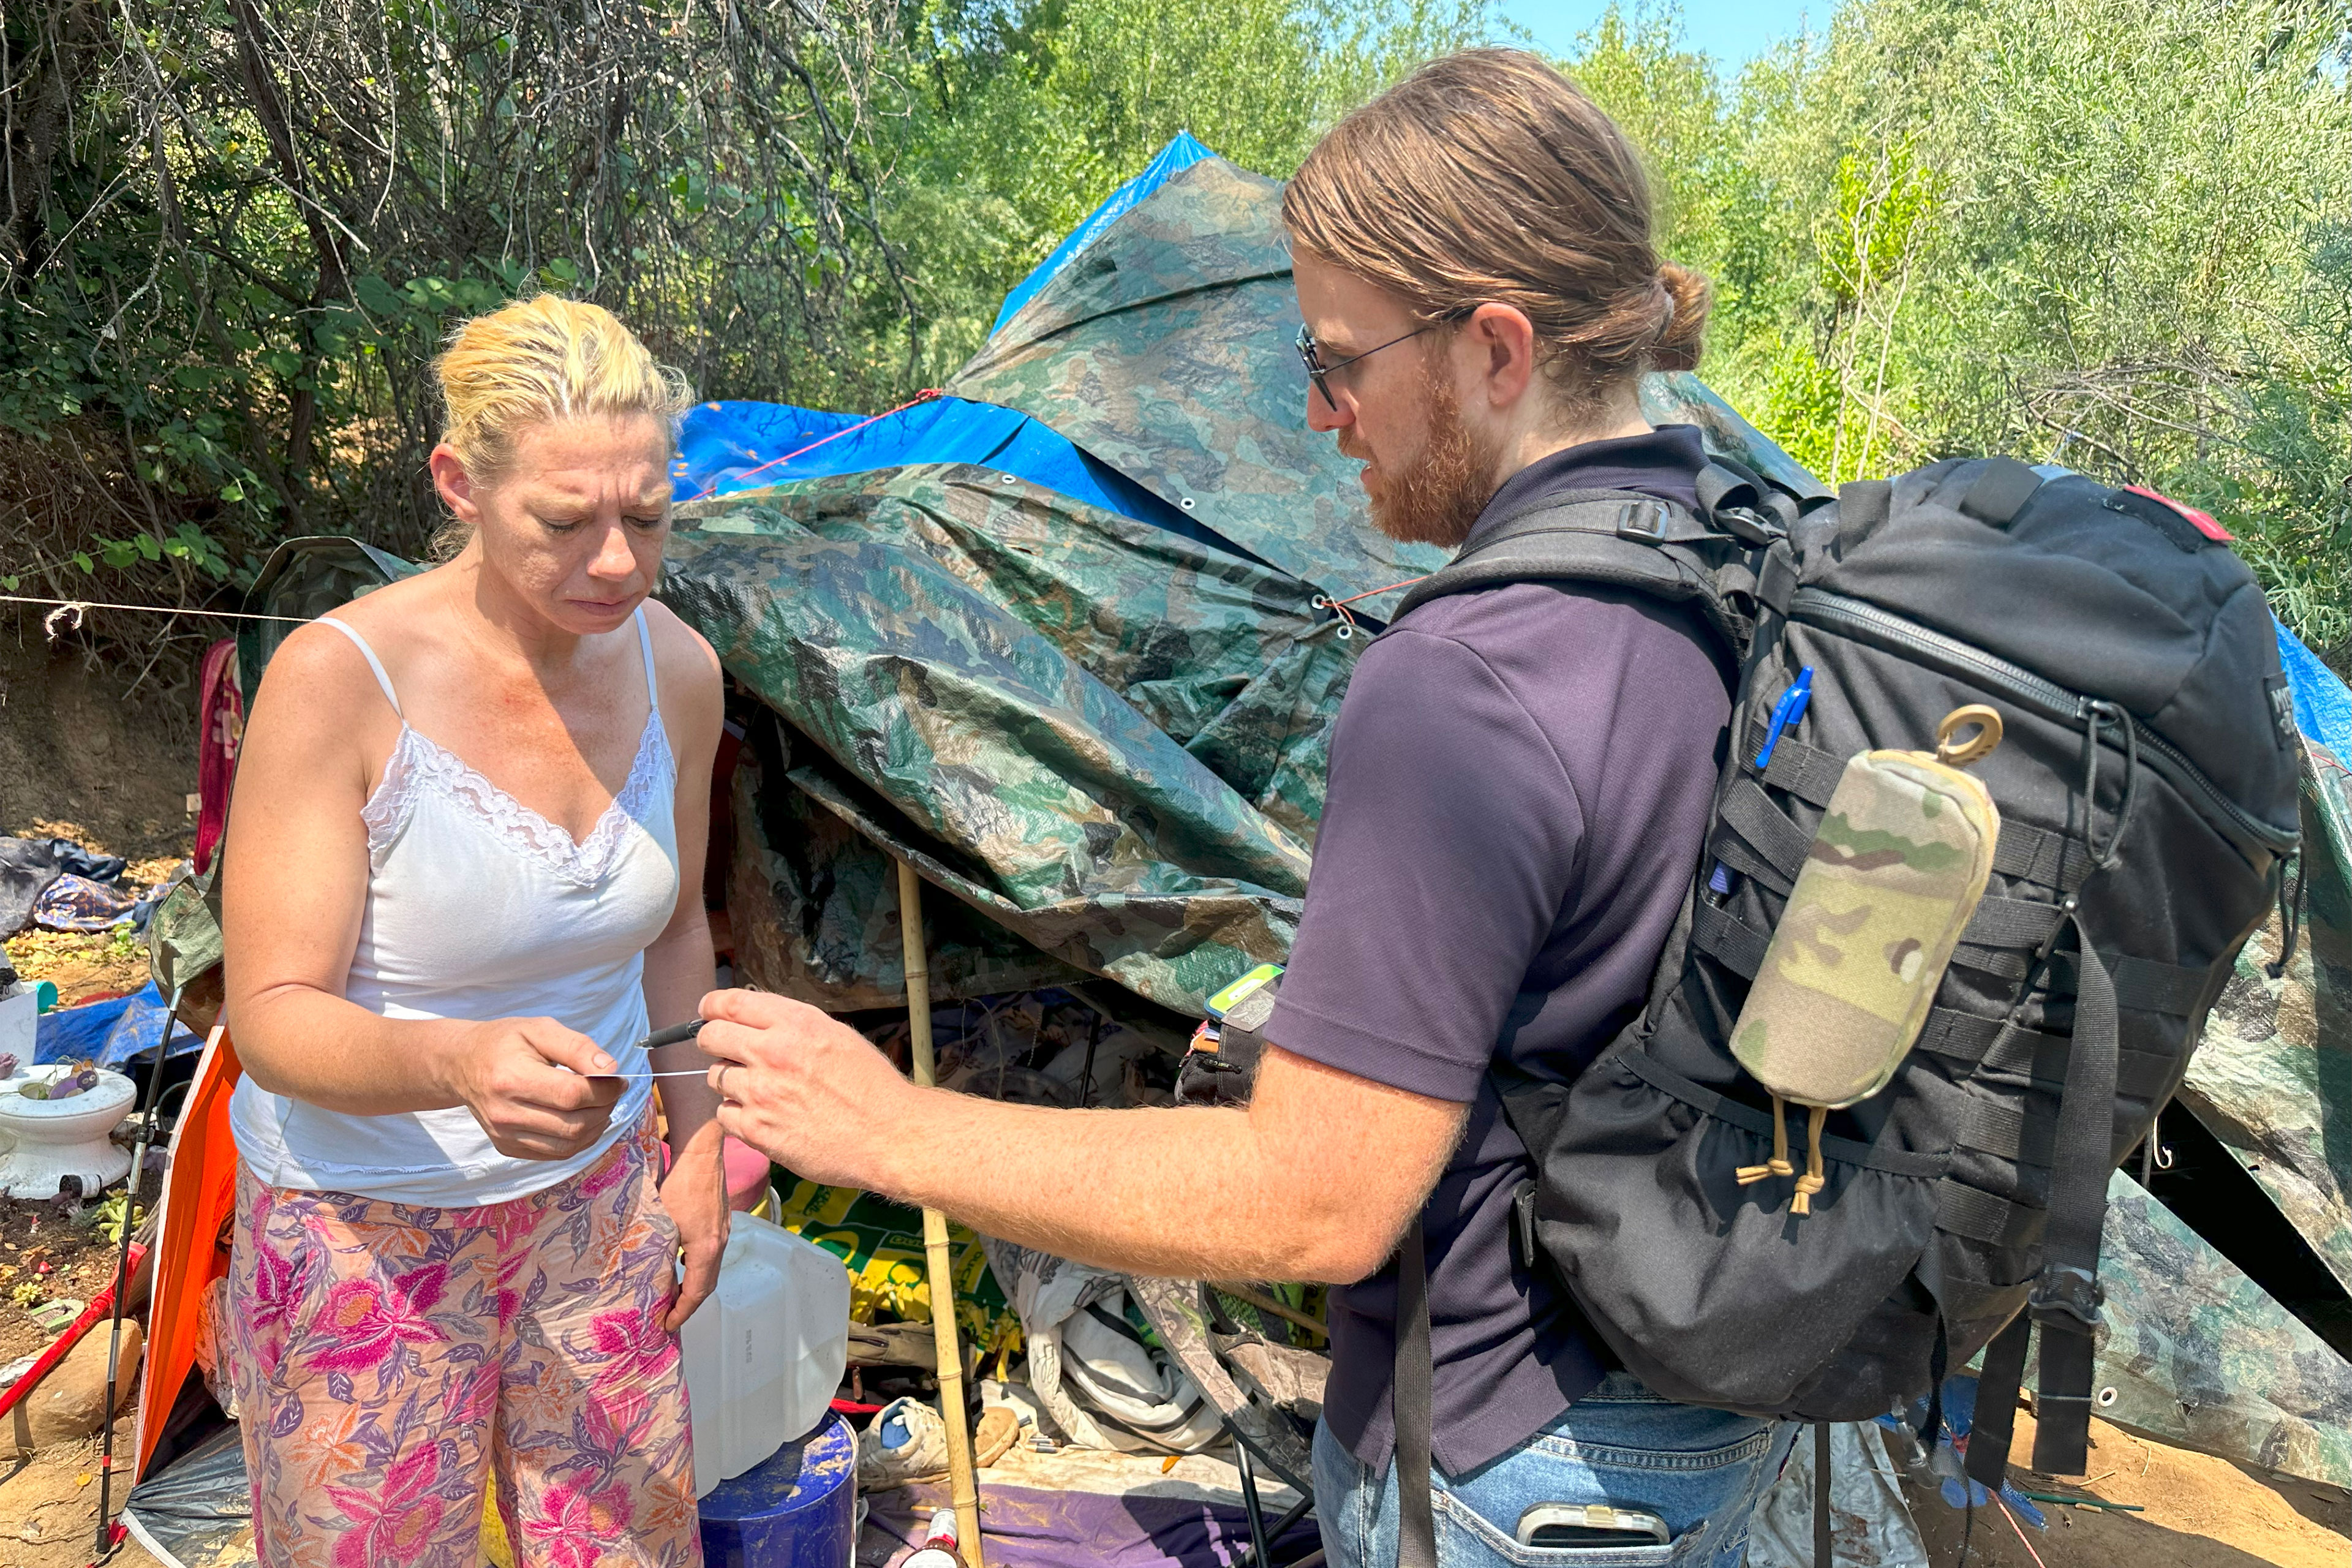 A man with long hair tied into a bun and wearing a black backpack shows something to a woman wearing a white tank top and pants with a floral pattern. They stand in front of a tent.